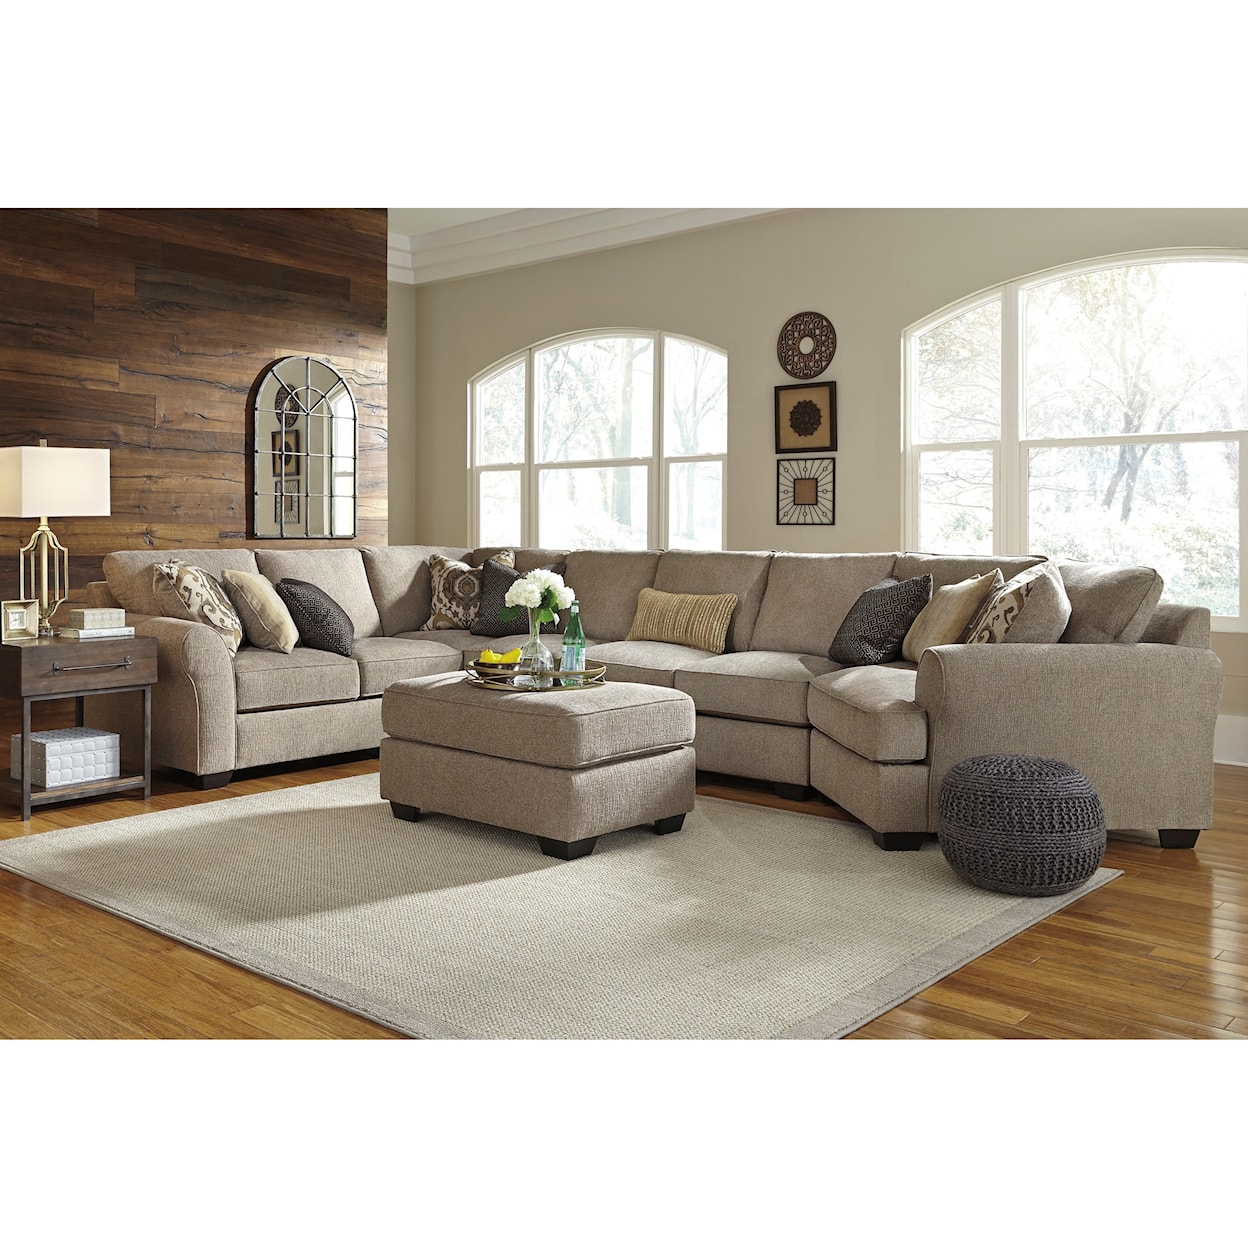 Ashley Furniture Benchcraft Pantomine 4-Piece Sectional with Ottoman